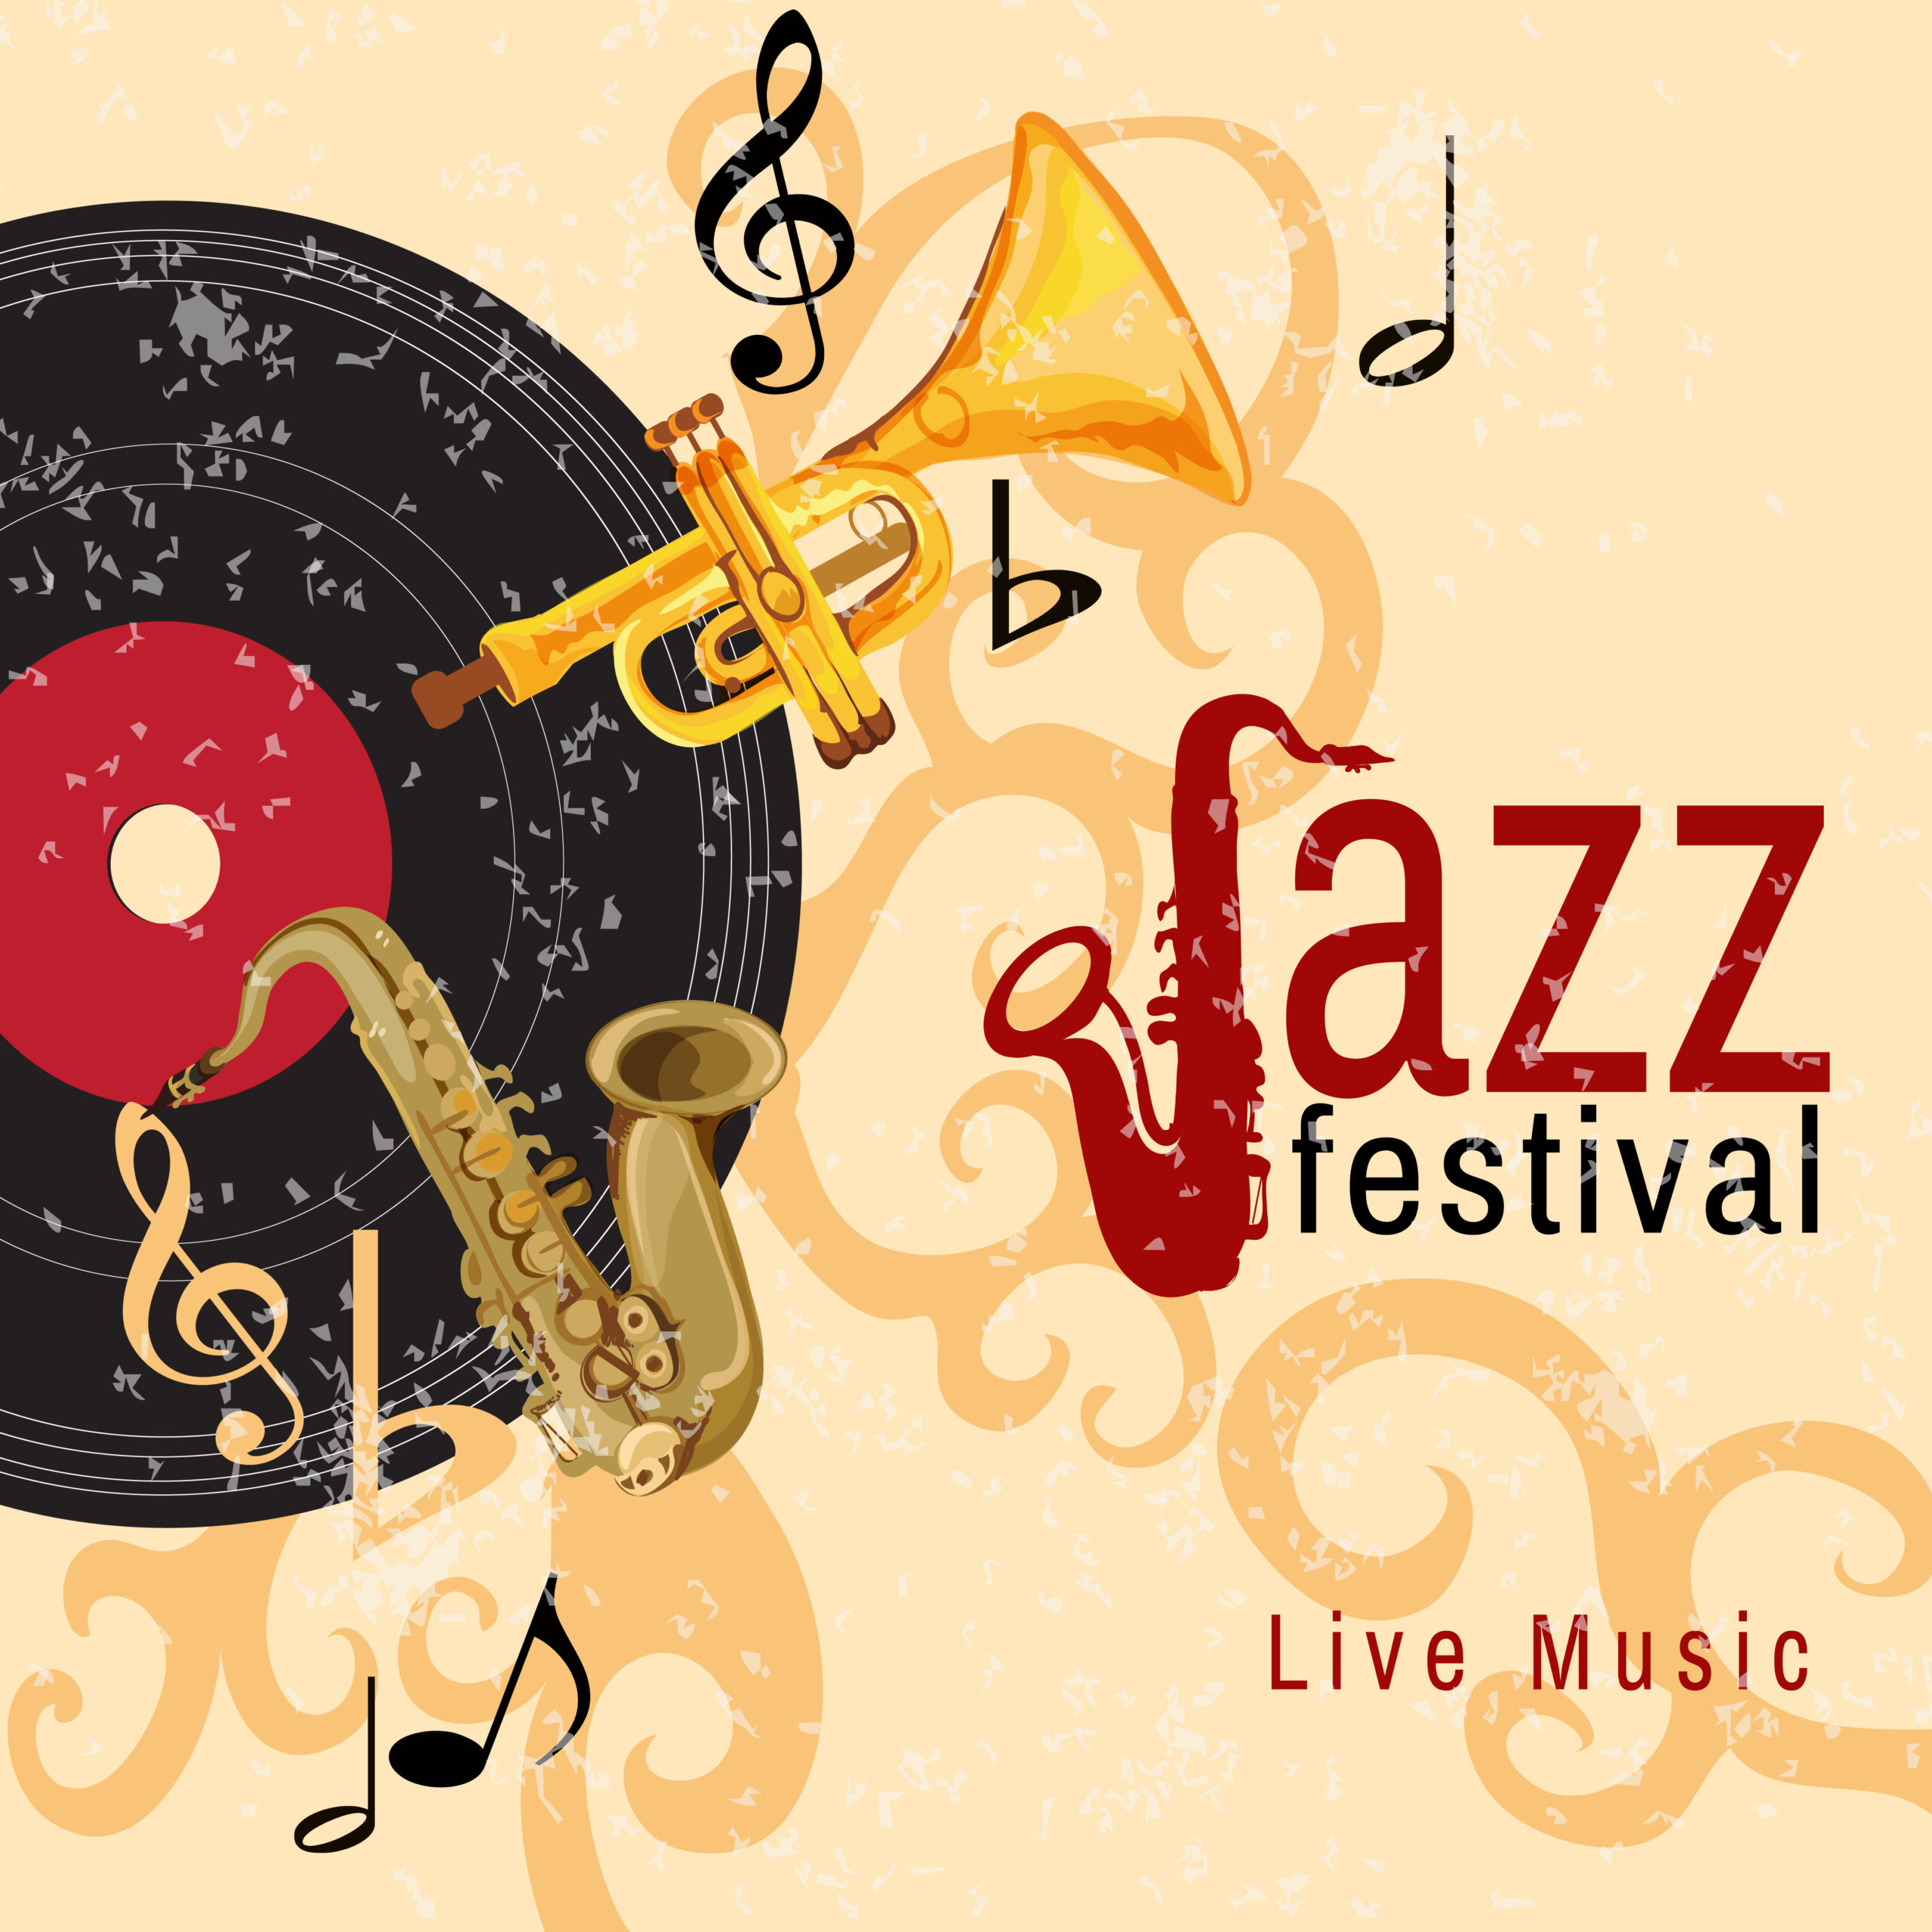 Jazz retro music festival concert live horn performance poster with black vinyl gramophone record abstract vector illustration